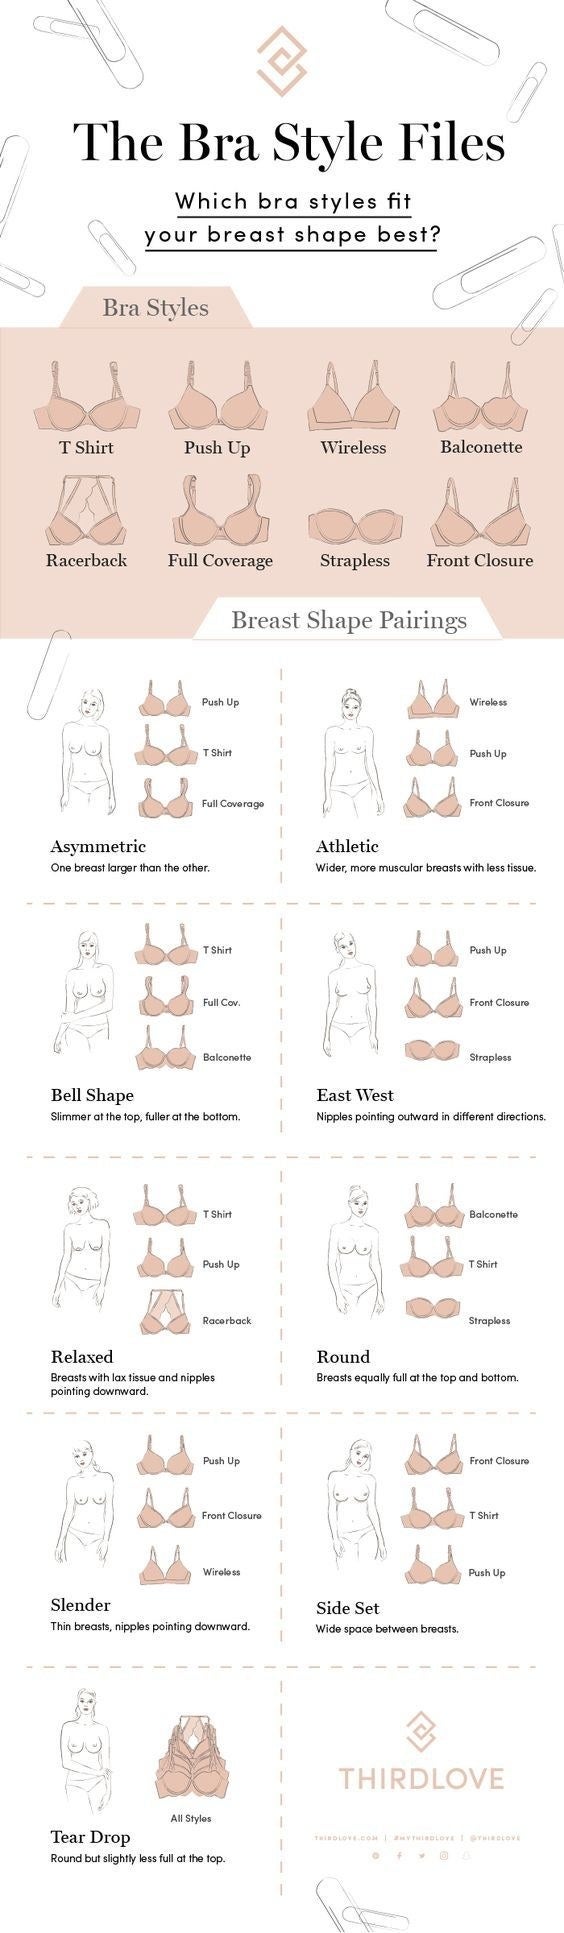 What Is The Best Bra For My Breast Shape